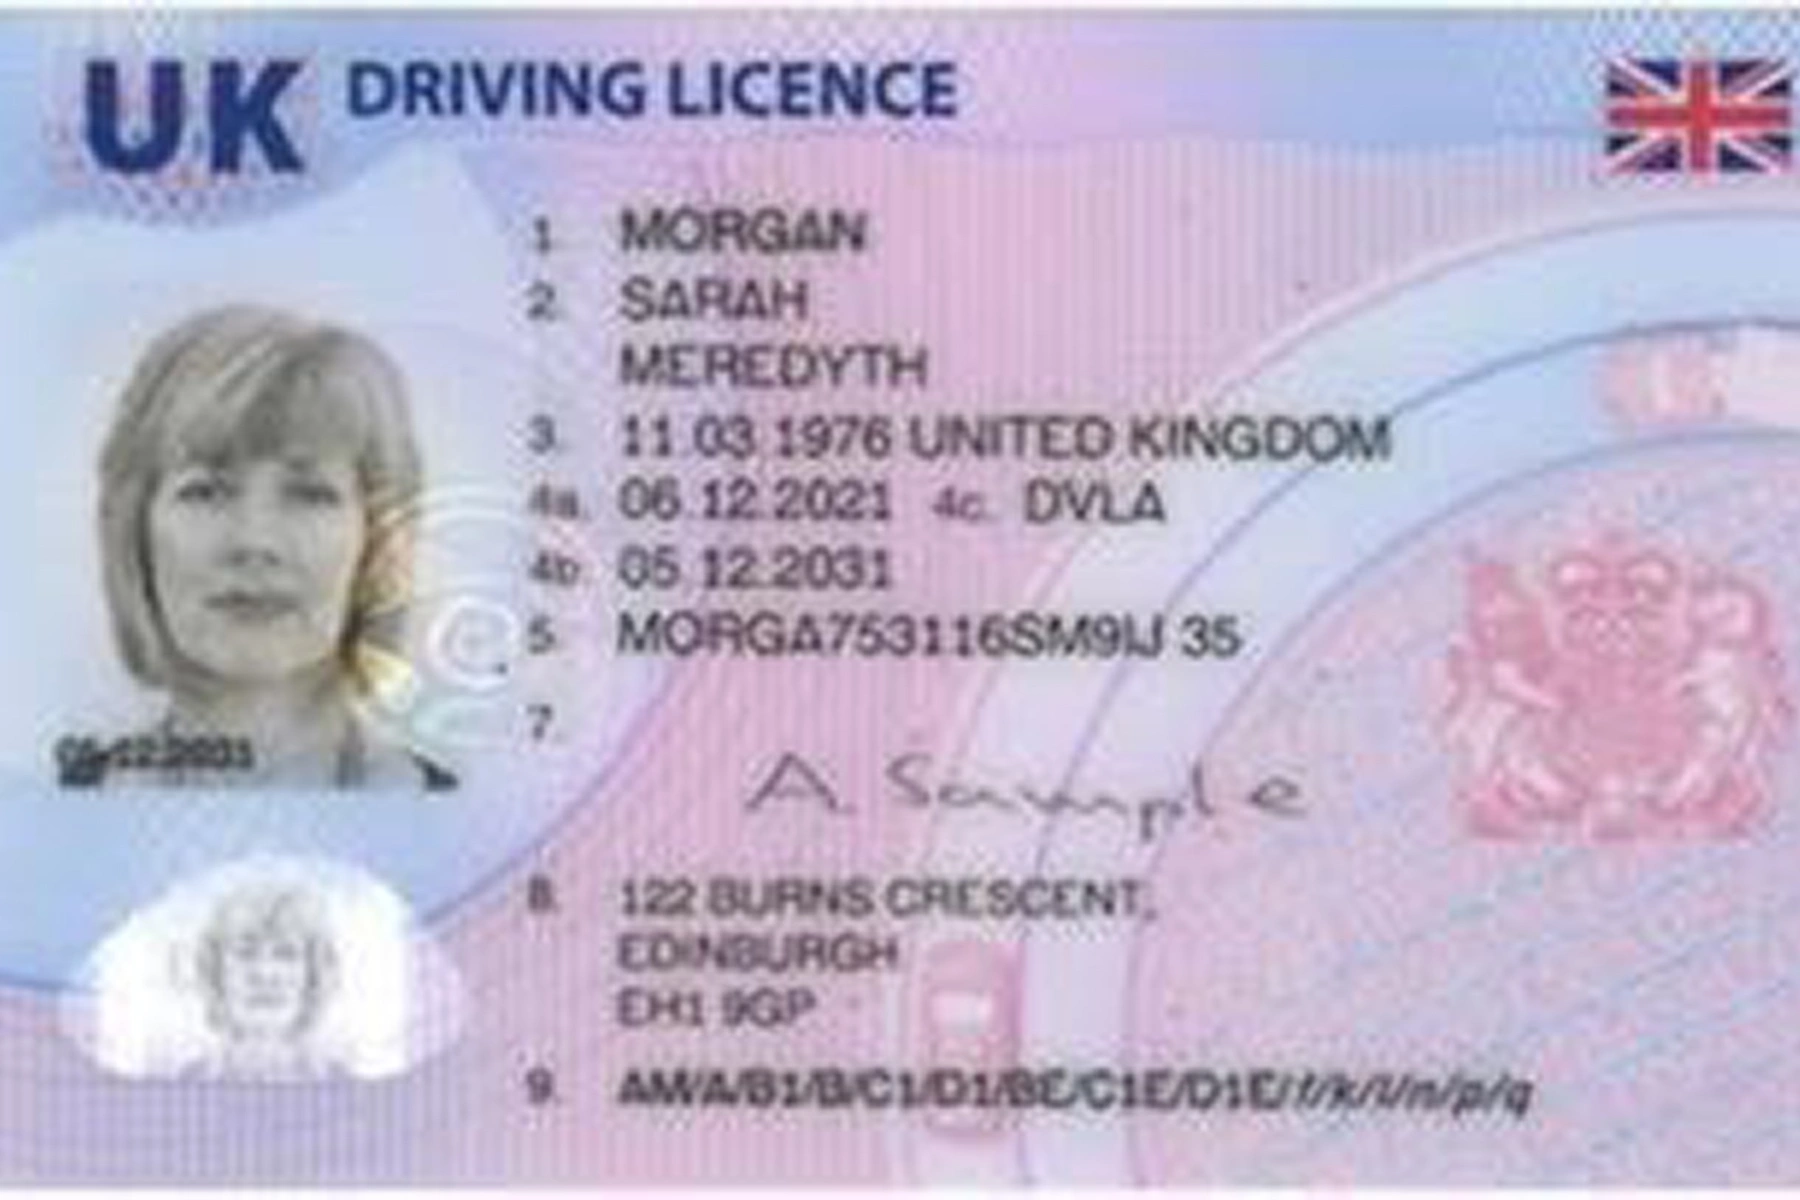 Example of a UK driver's license